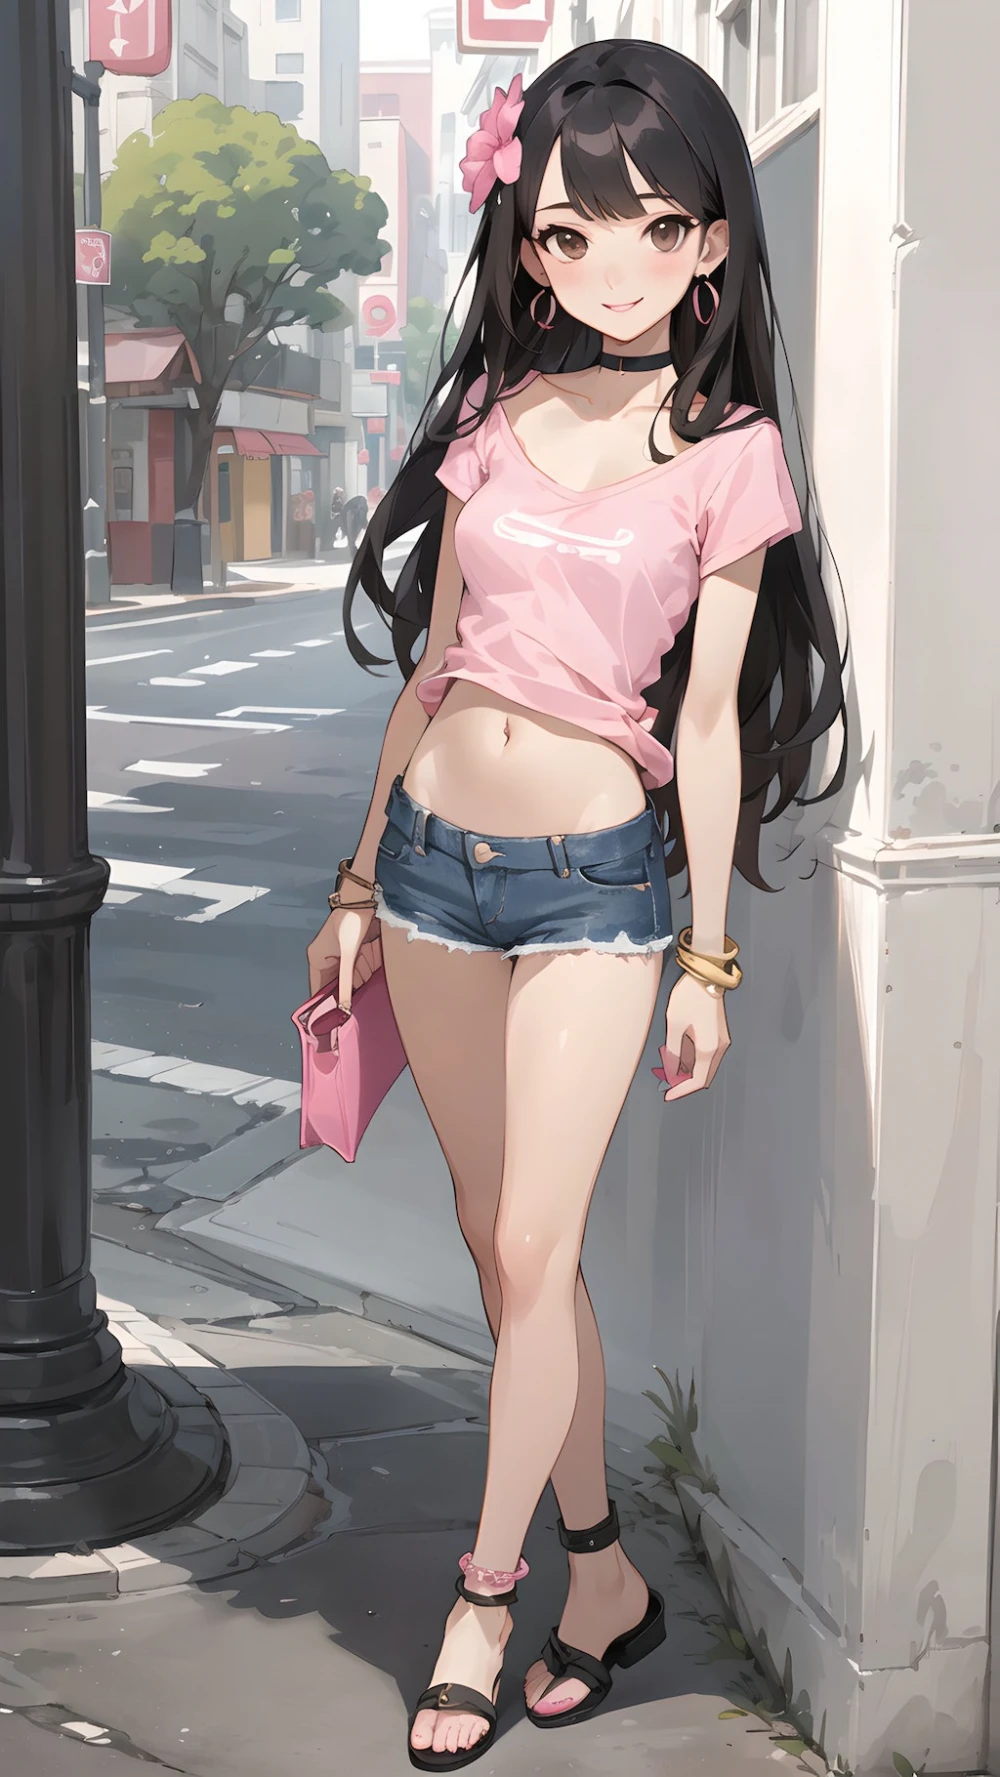 midriff-anime-style-all-ages-18